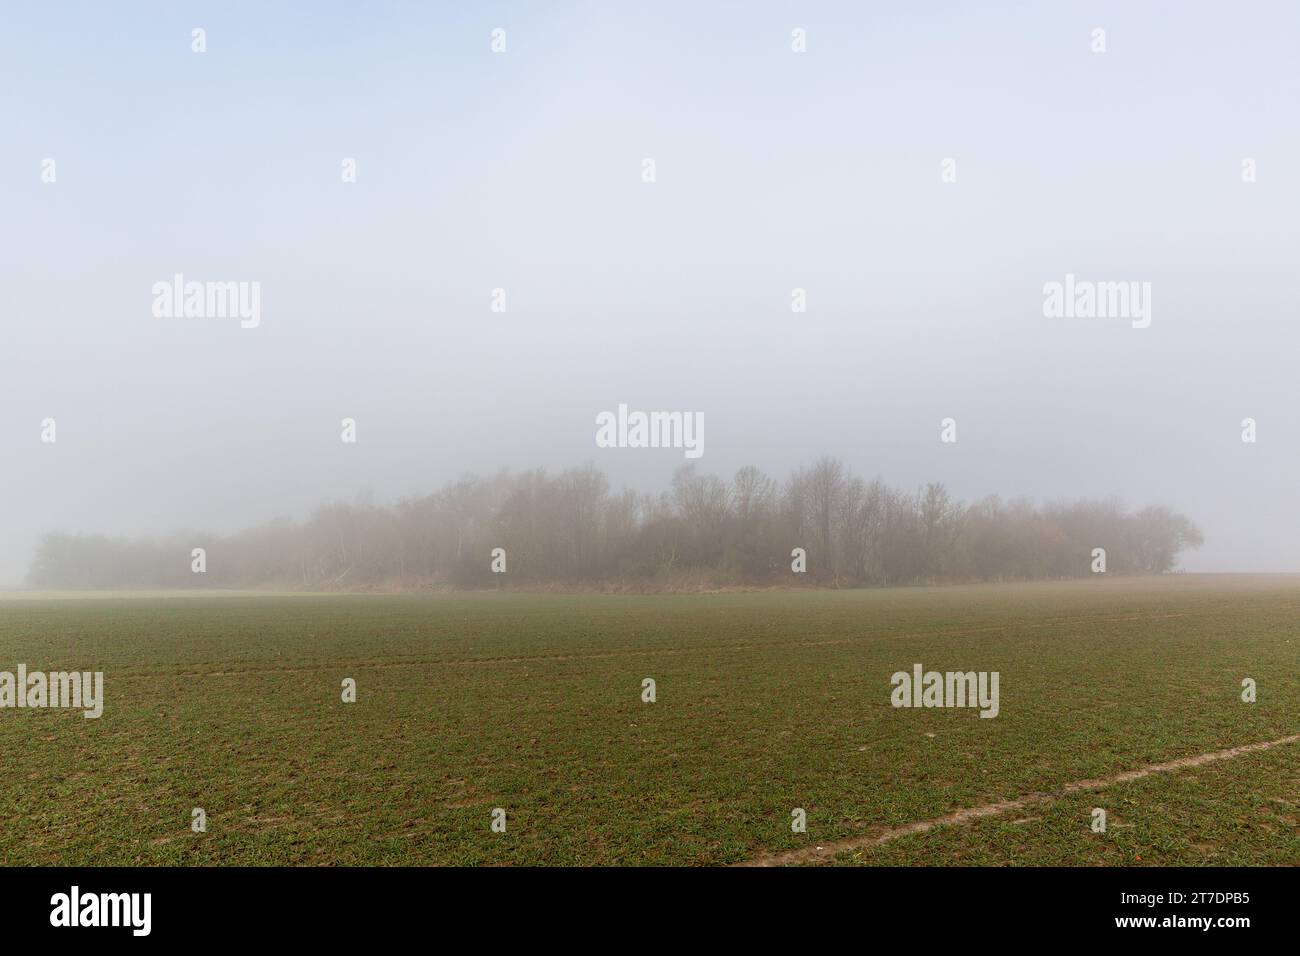 A veil of mist rises over a hedge of trees one late winter morning. Stock Photo